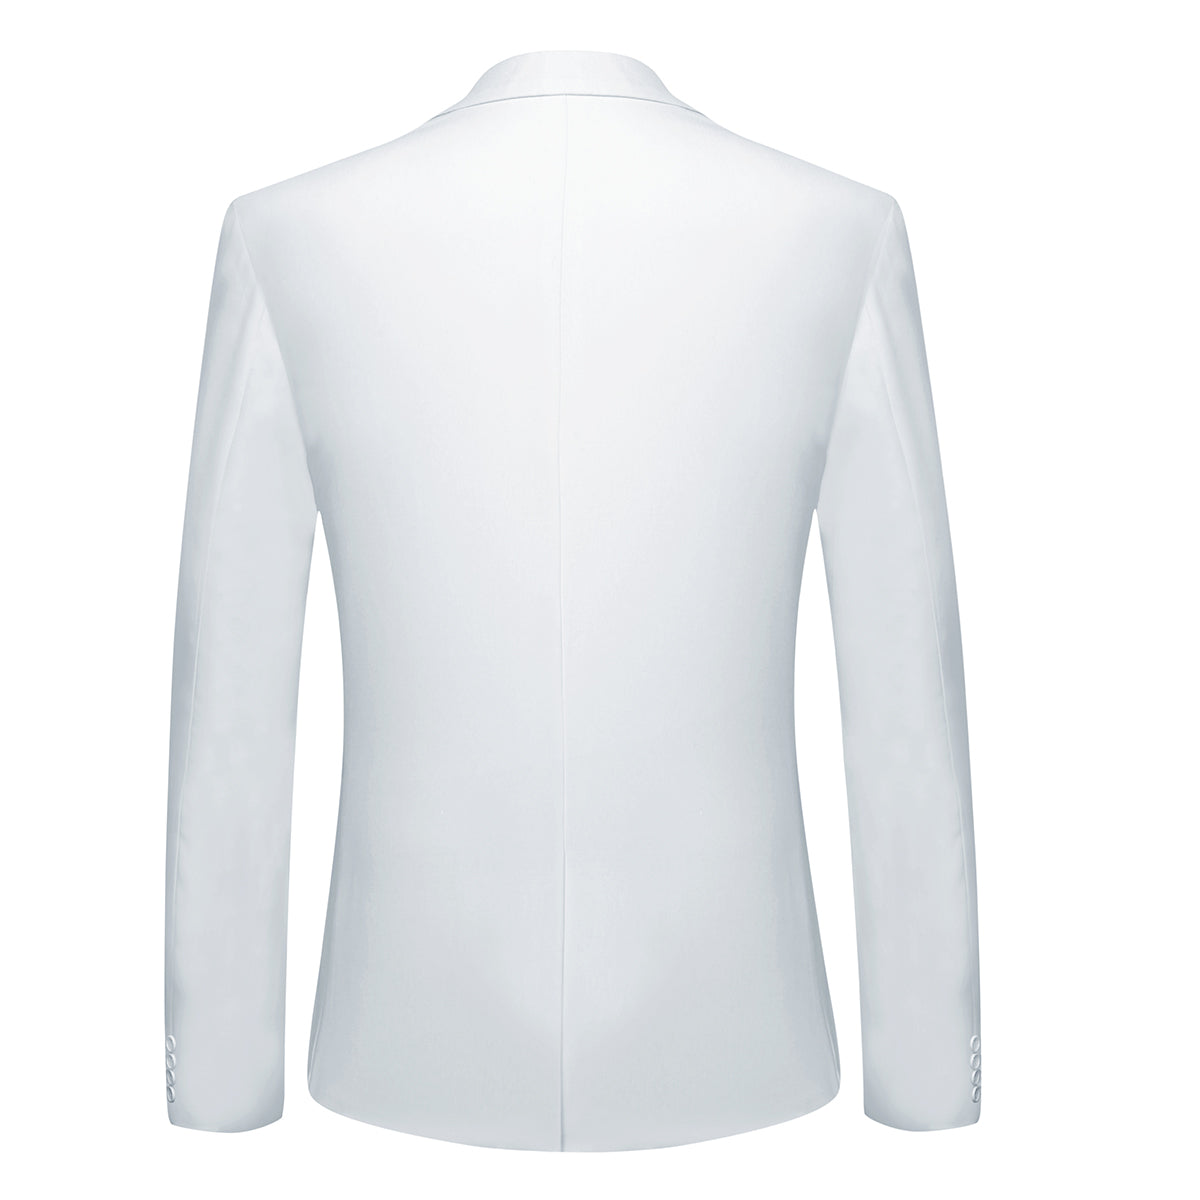 Two Piece White Suit One Button Suit